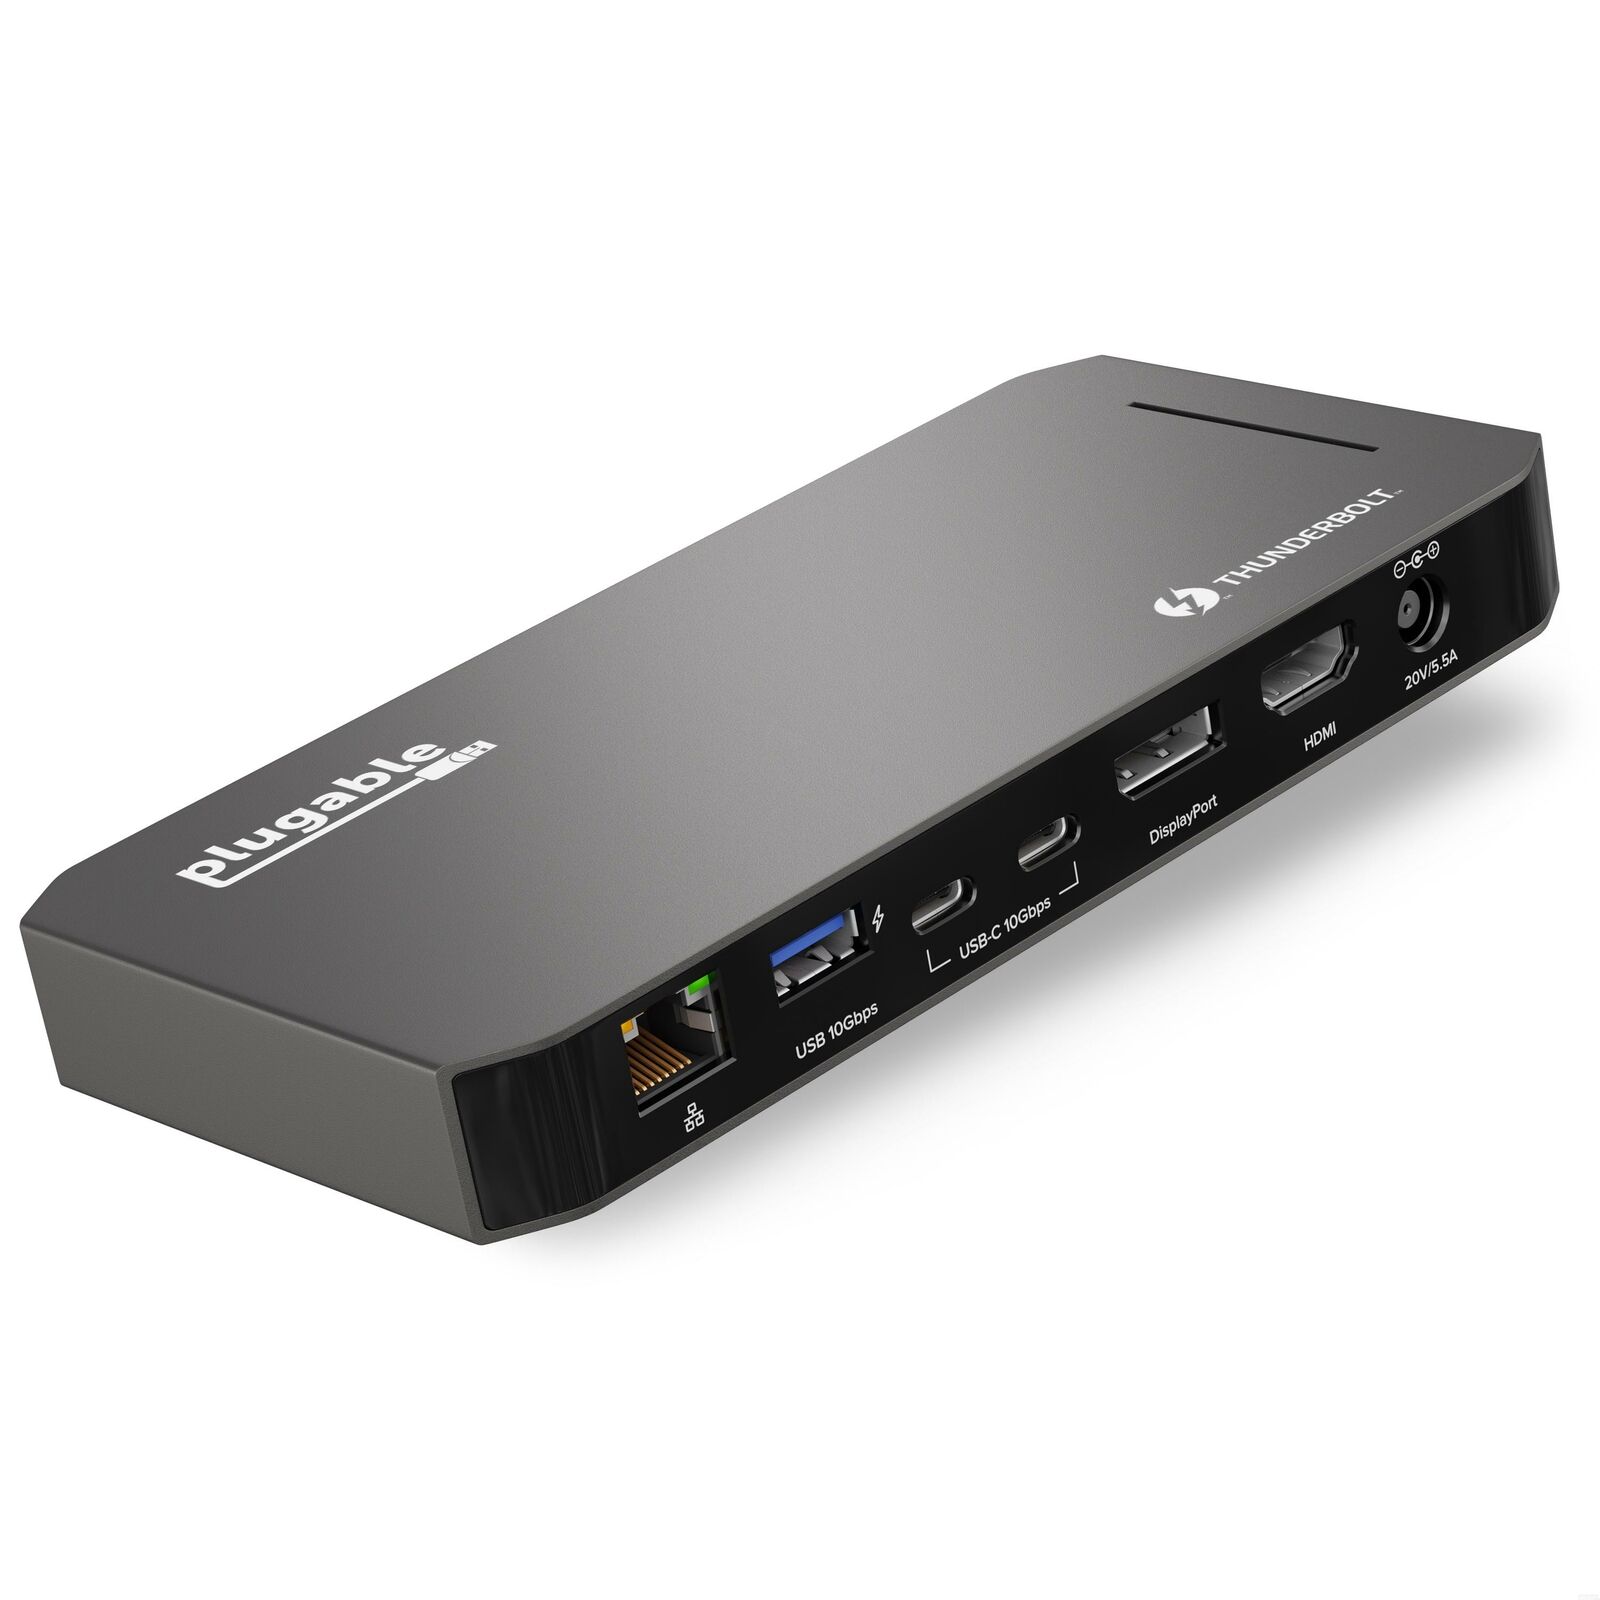 Plugable Thunderbolt 3 and USB C Docking Station with 96W Charging